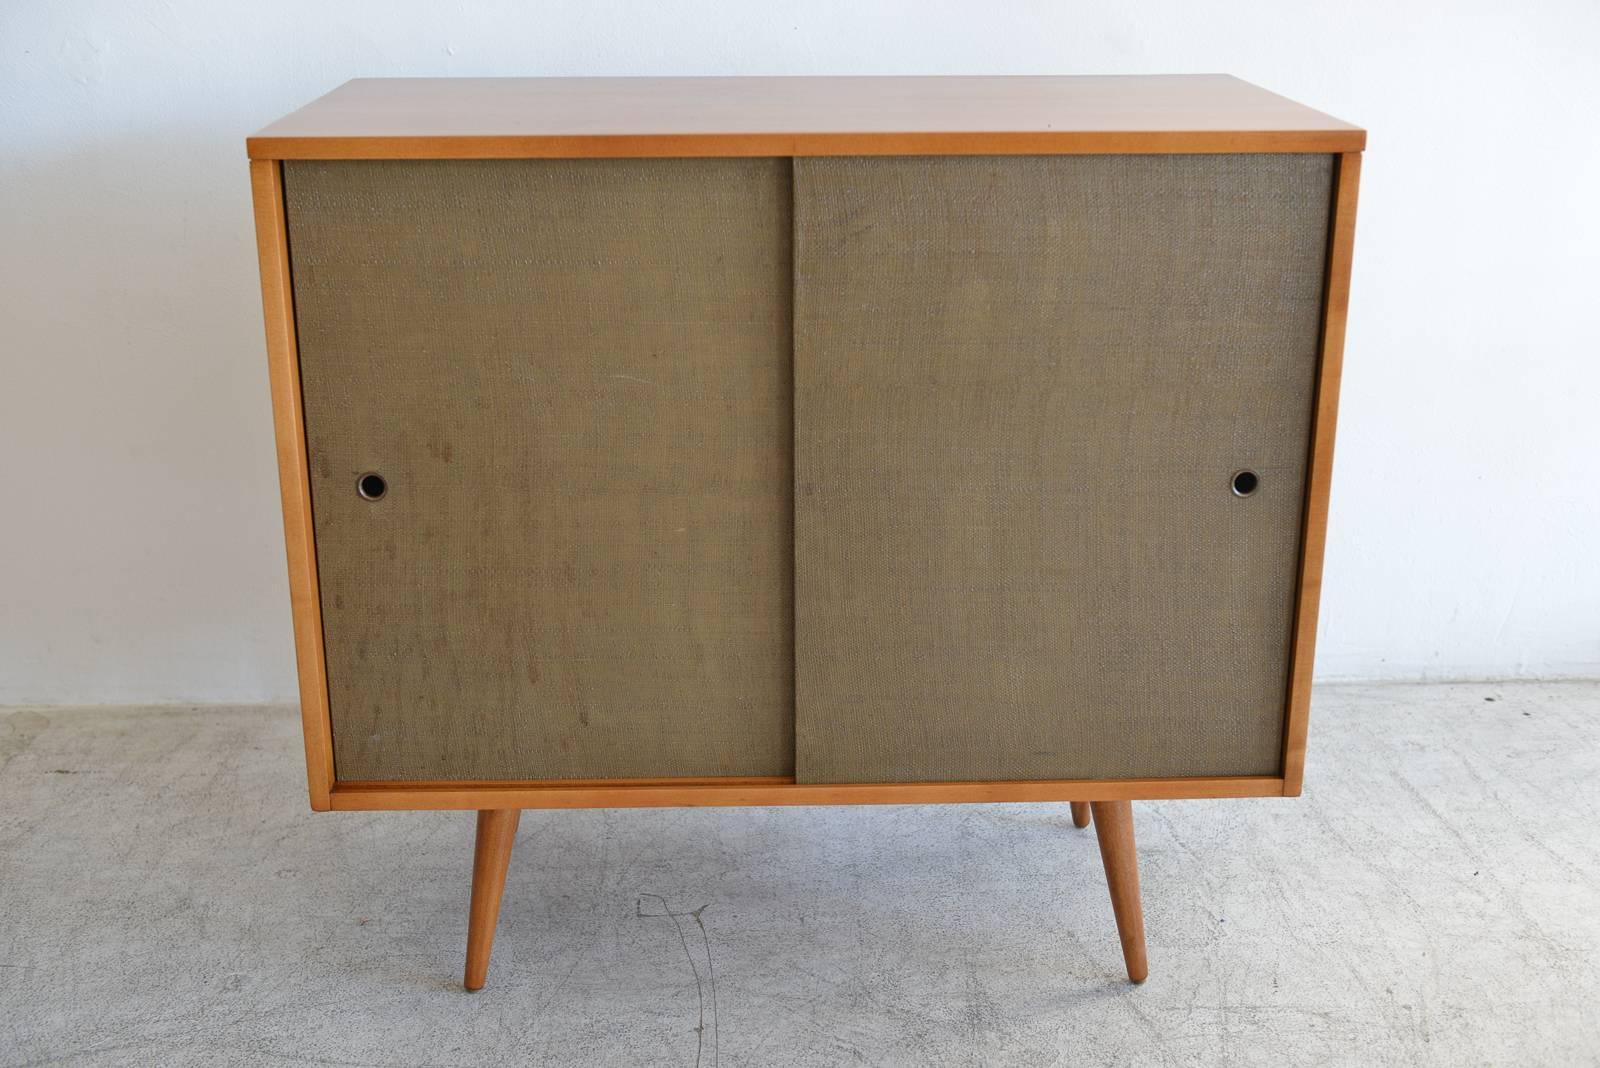 Paul McCobb Planner Group large cabinet, circa 1955. Maple with original grass cloth sliding doors. Perfect by itself or as a compliment to the smaller cabinet available in a separate listing. Professionally restored wood in showroom condition.